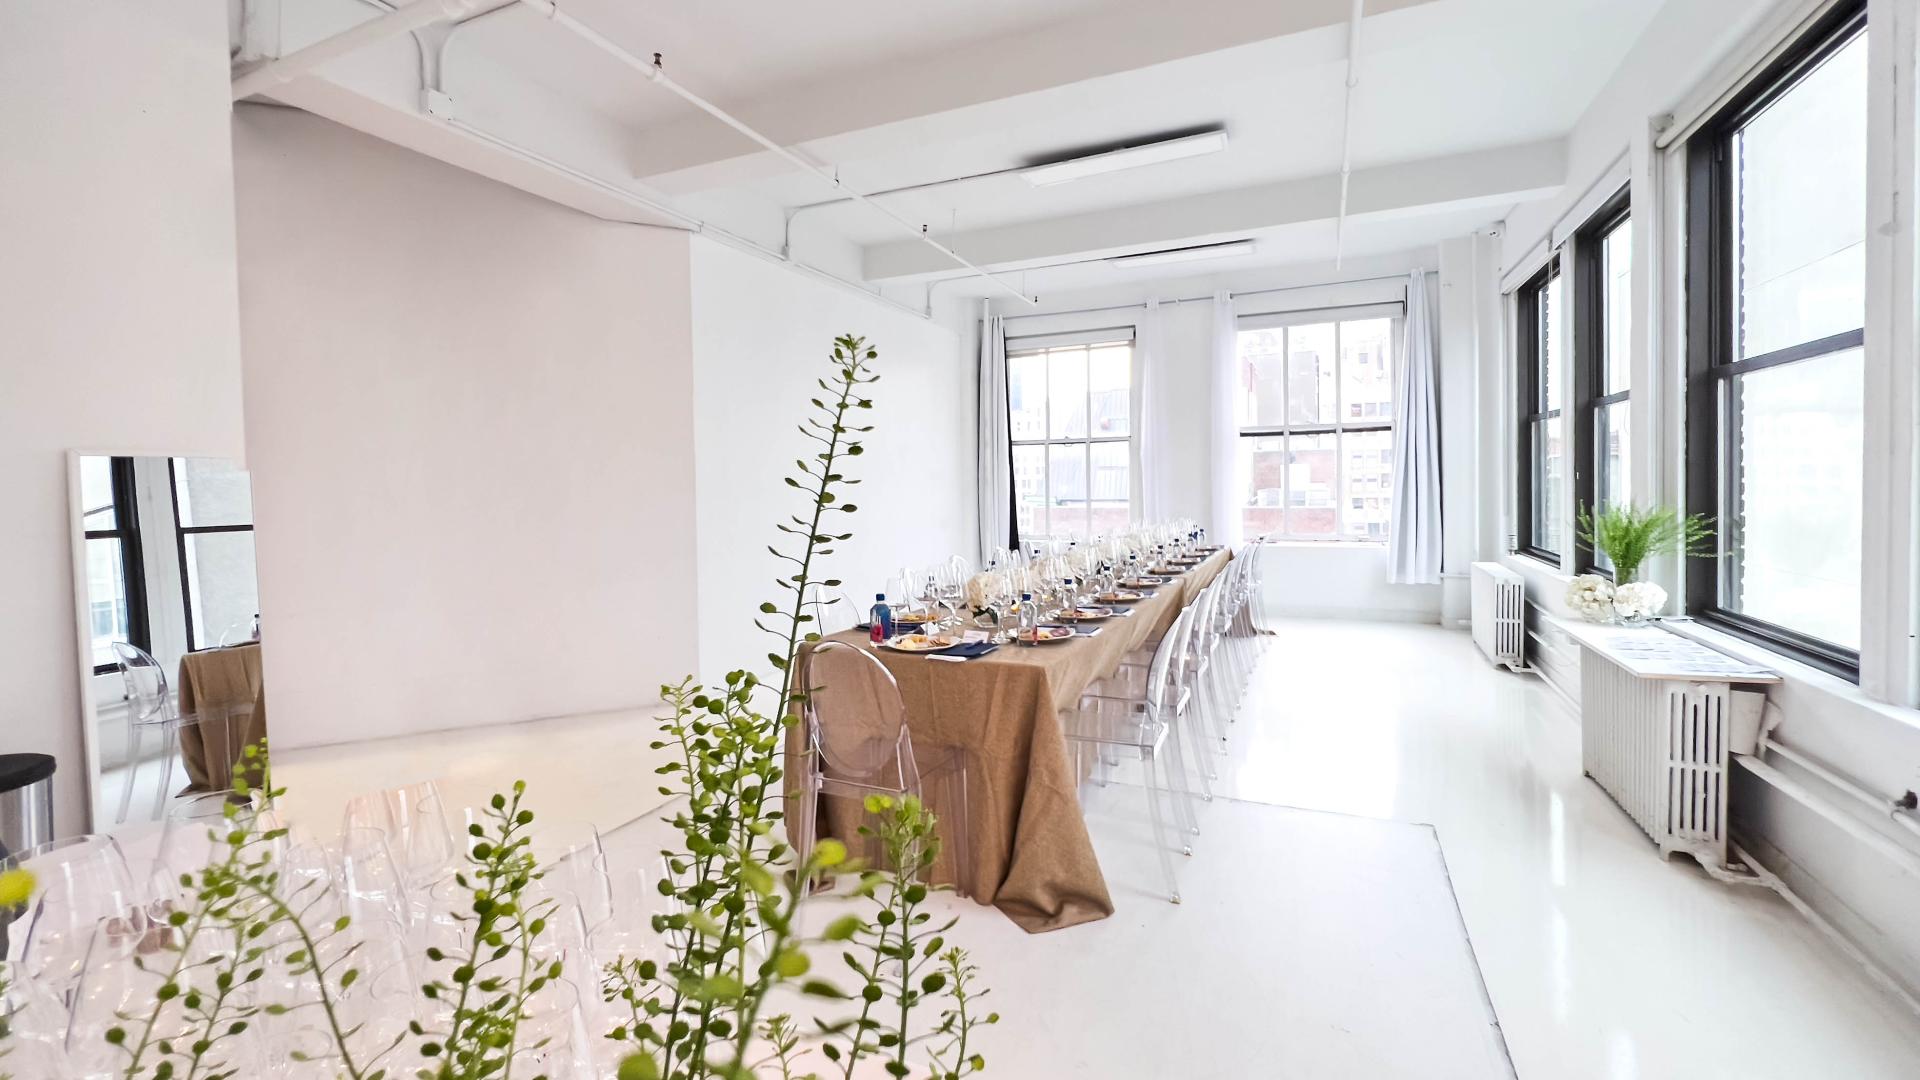 Loft Event Spaces for Rent in Manhattan, NY